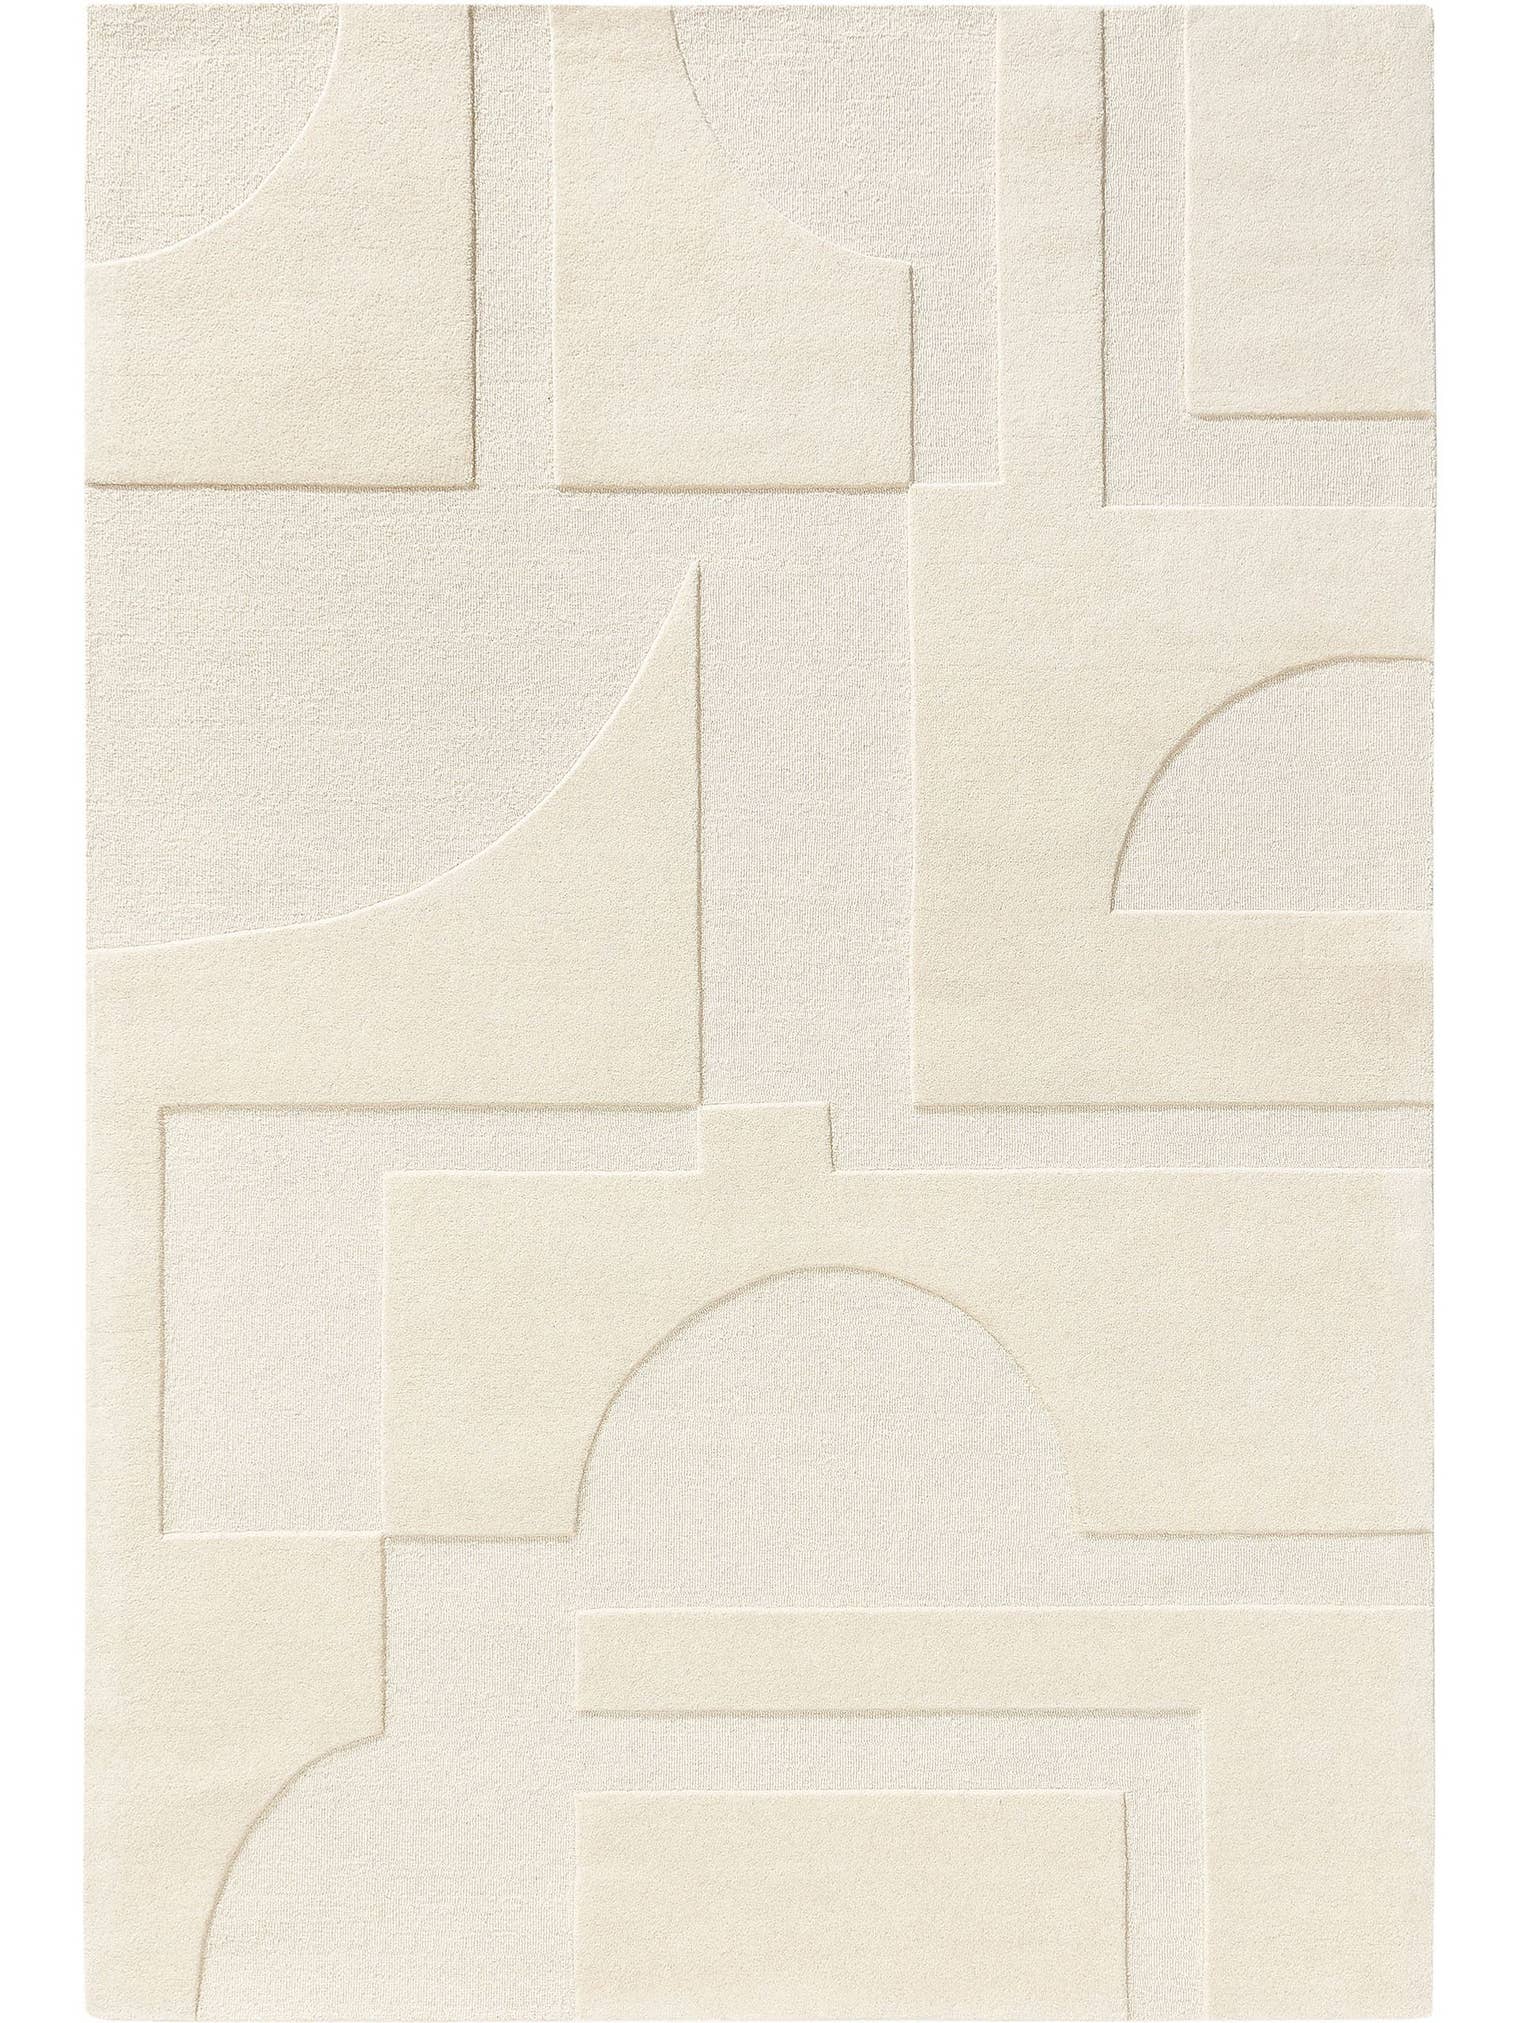 Rug made of 100% Wool in Beige with a 1- 5 mm high pile by benuta Pure